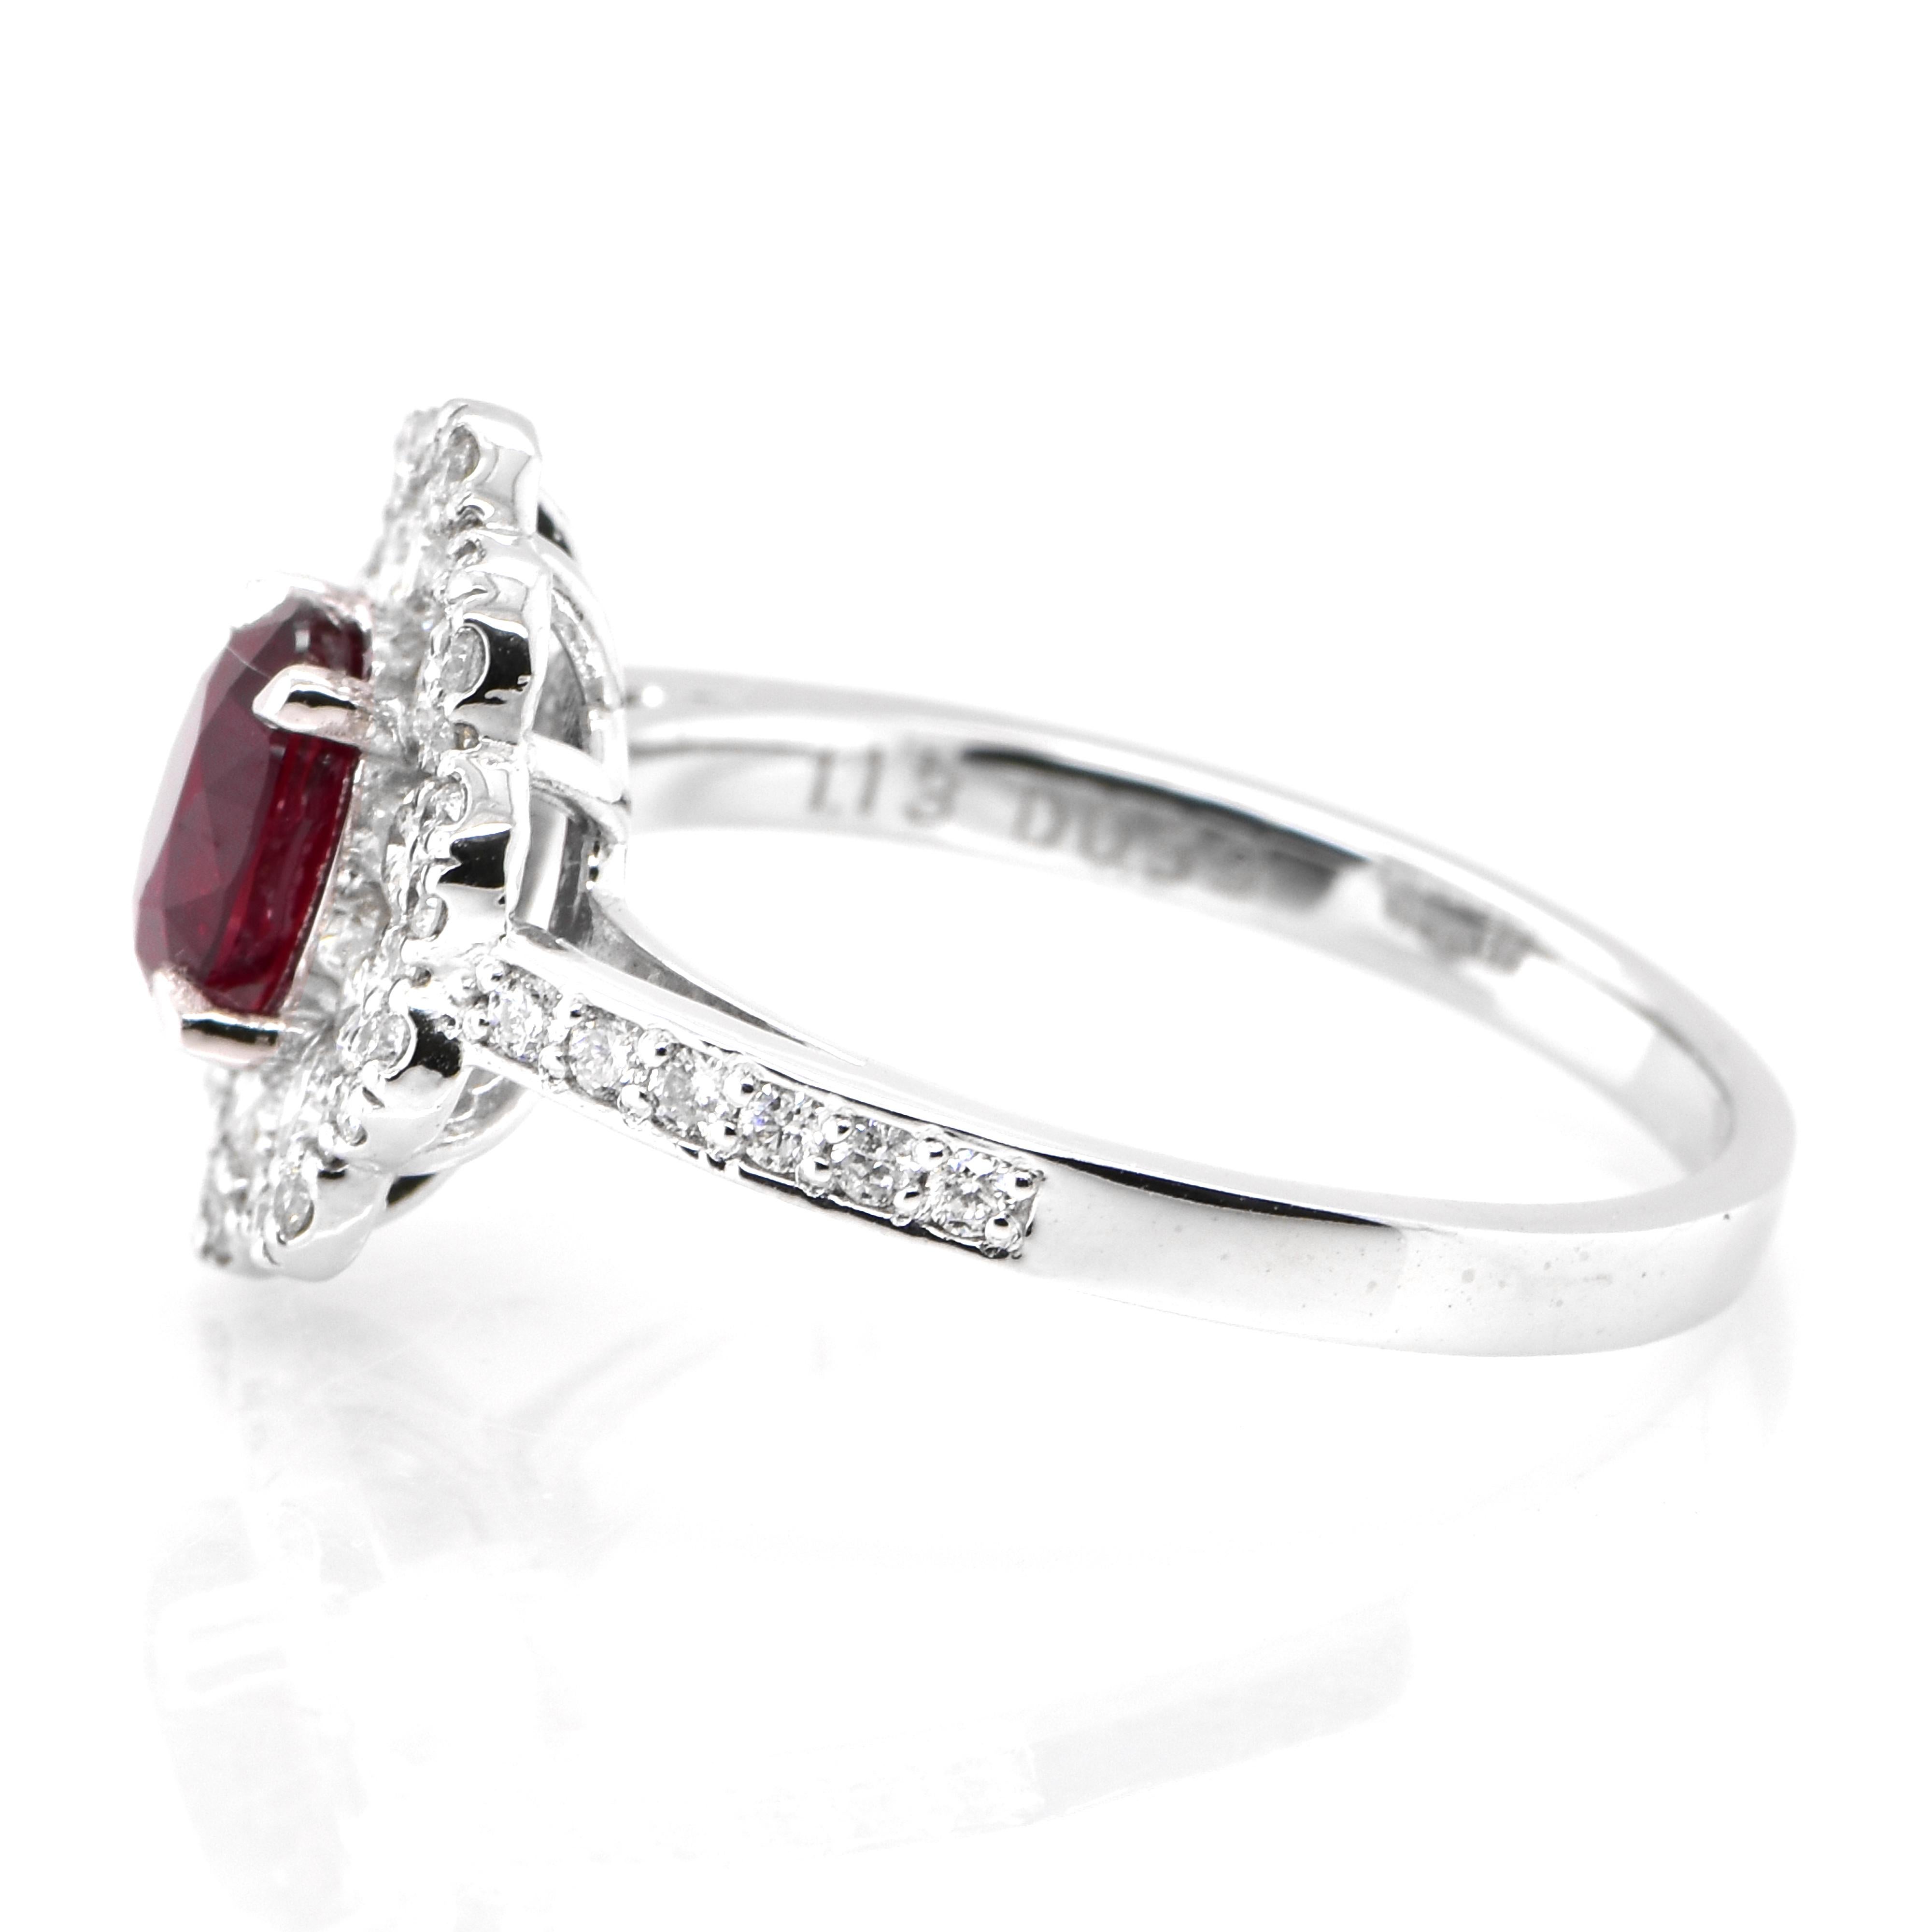 Oval Cut GIA Certified 1.13 Carat Natural, Unheated Ruby and Diamond Ring set in Platinum